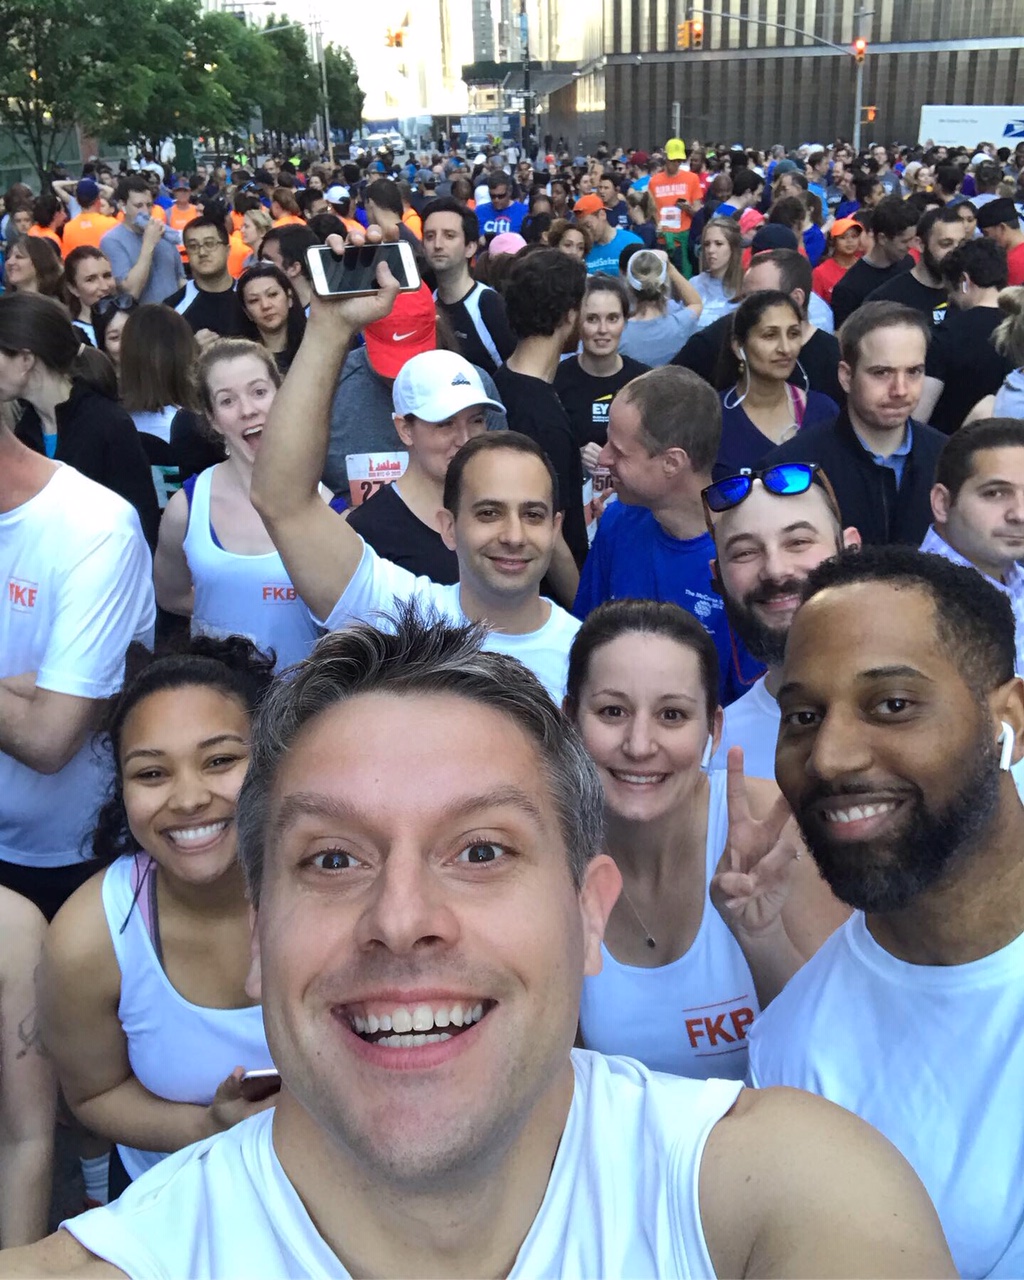 FKB PARTICIPATED IN THE AMERICAN HEART ASSOCIATION 3 MILE WALL STREET